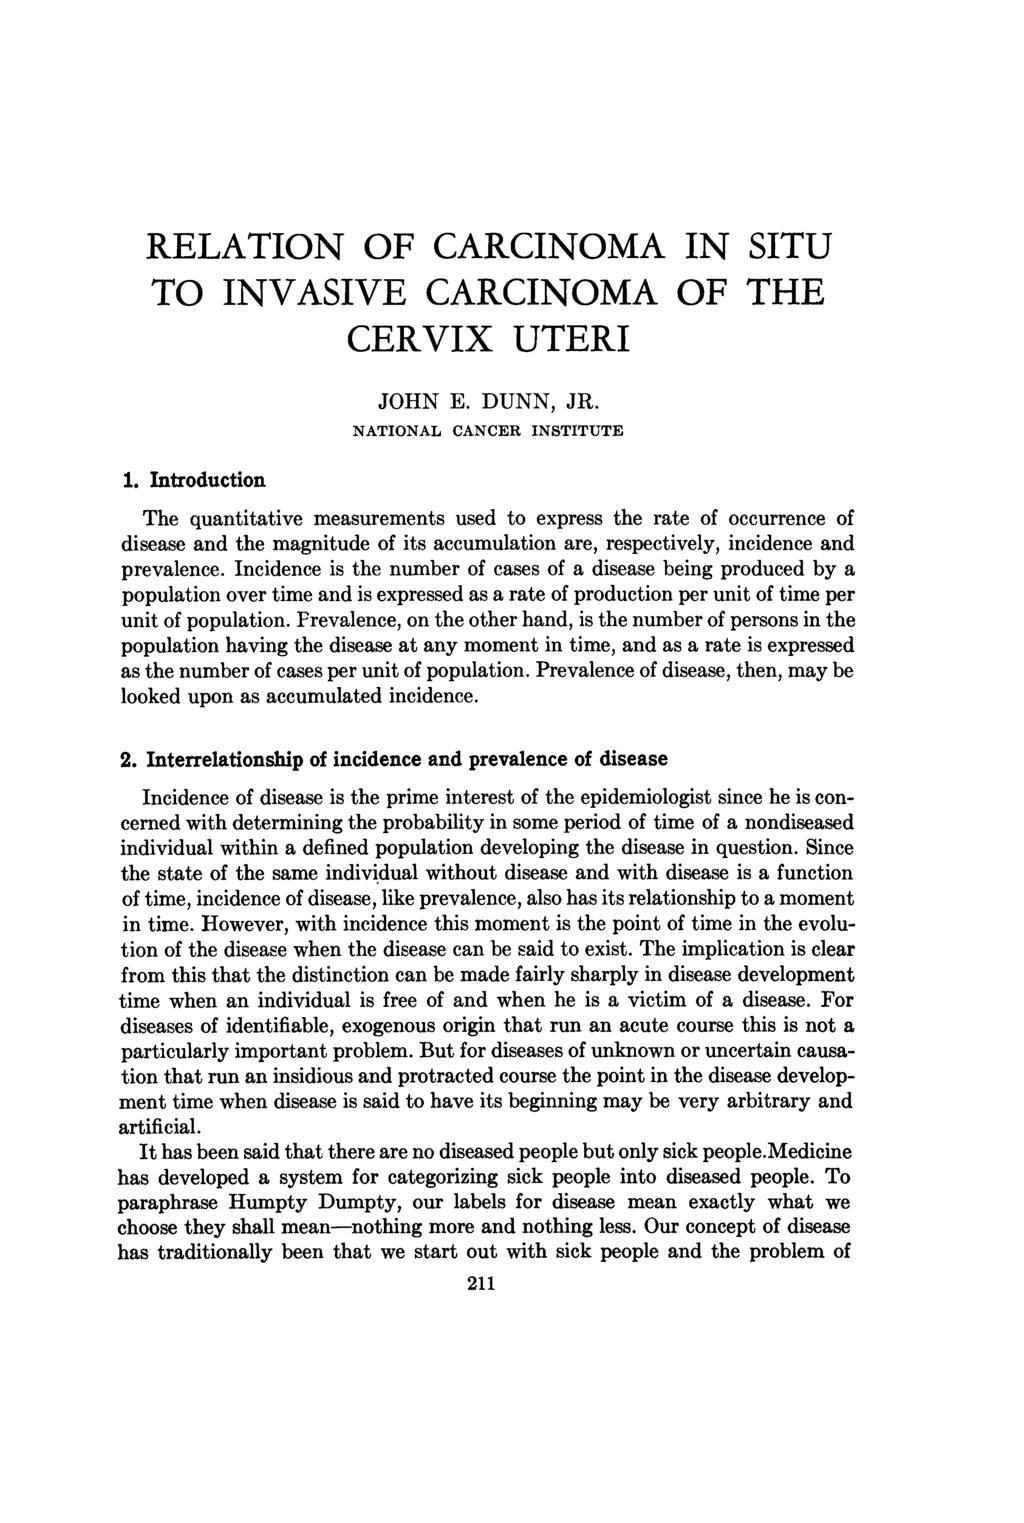 RELATION OF CARCINOMA IN SITU TO INVASIVE CARCINOMA OF THE CERVIX UTERI JOHN E. DUNN, JR. NATIONAL CANCER INSTITUTE 1.